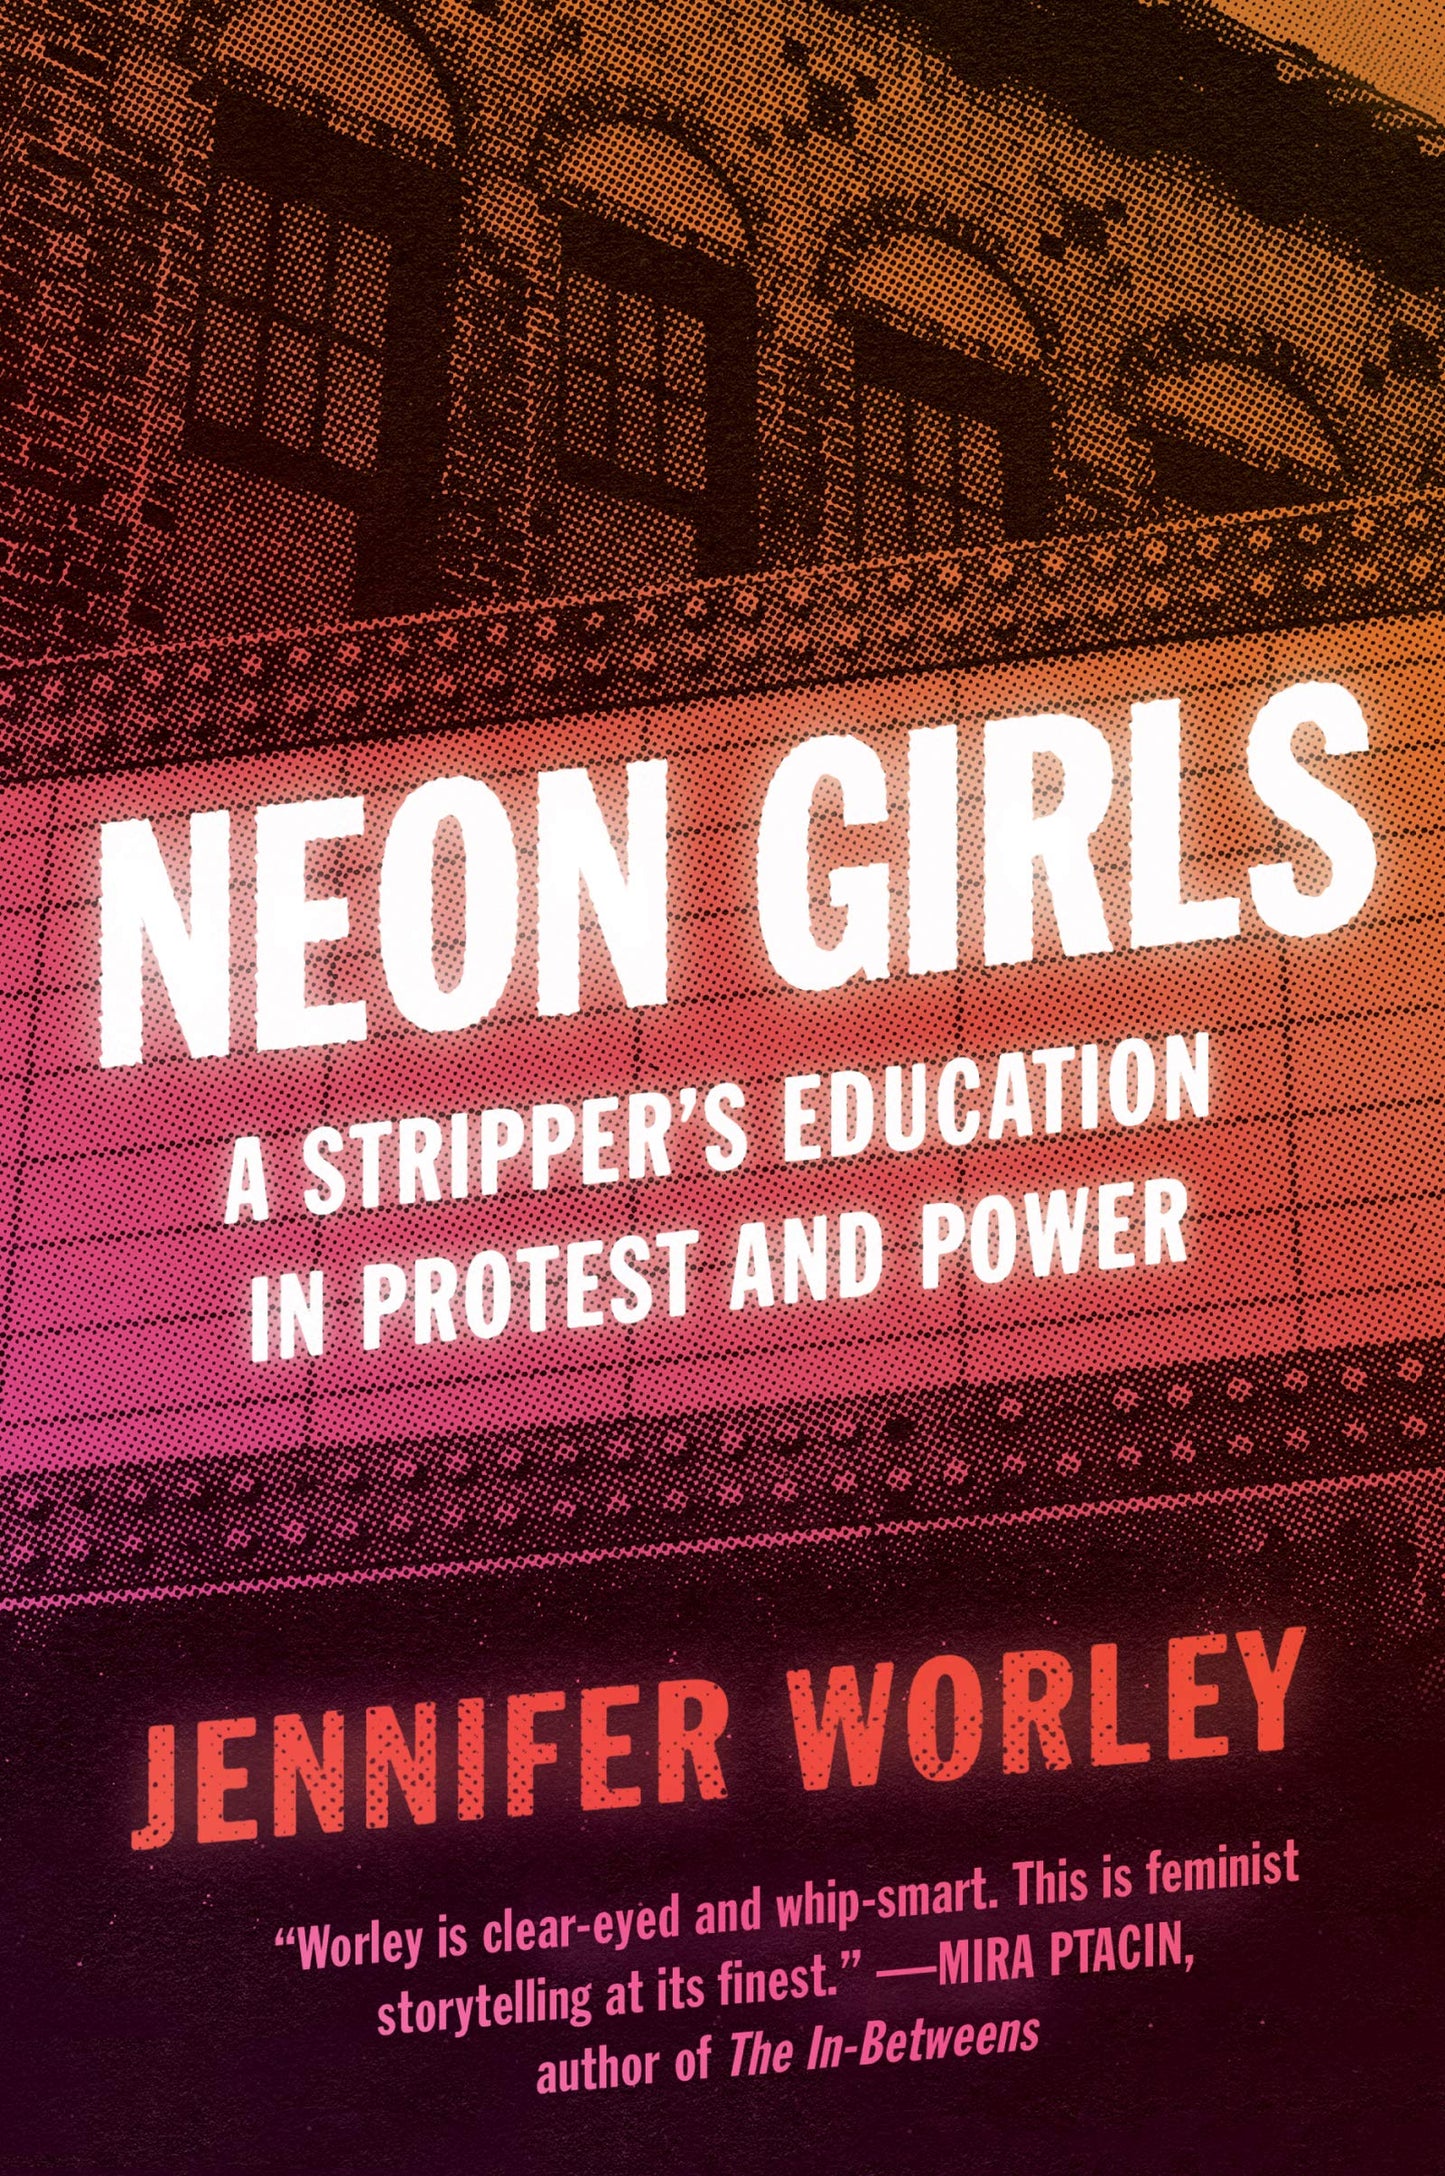 Neon Girls // A Stripper's Education in Protest and Power